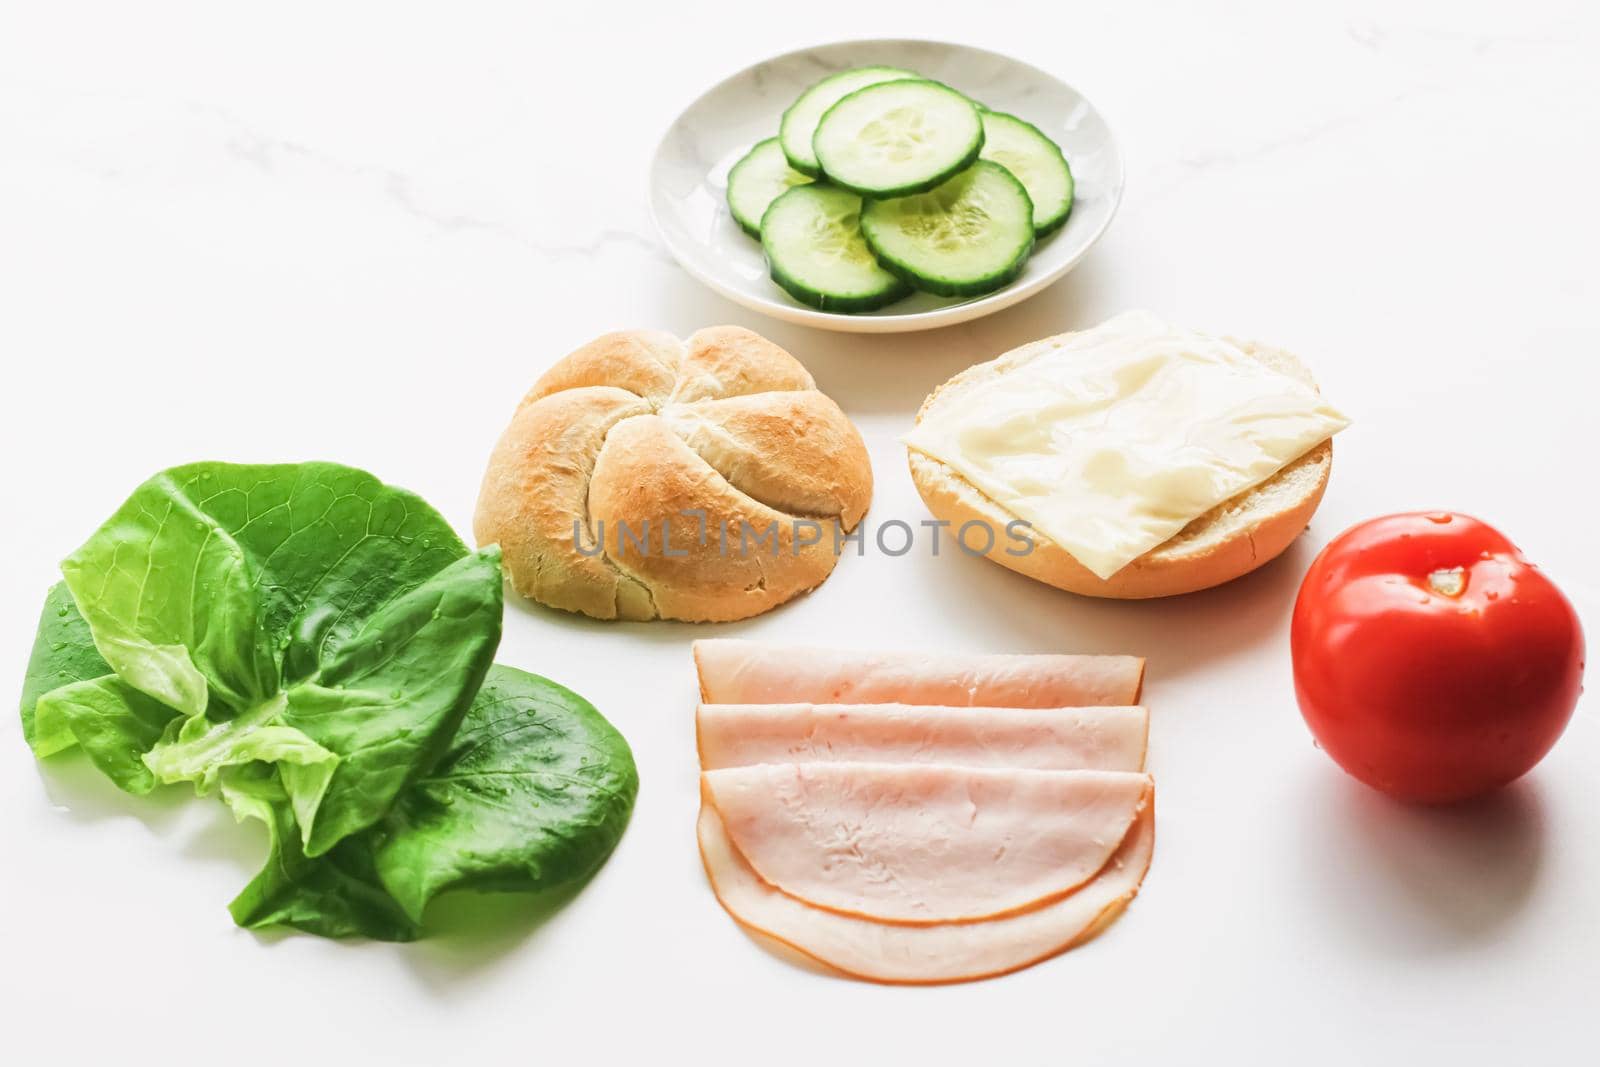 Food products and ingredients for making sandwich. Ham, cheese, burger bun, lettuce, cucumber and tomato as recipe flatlay on marble kitchen table by Anneleven